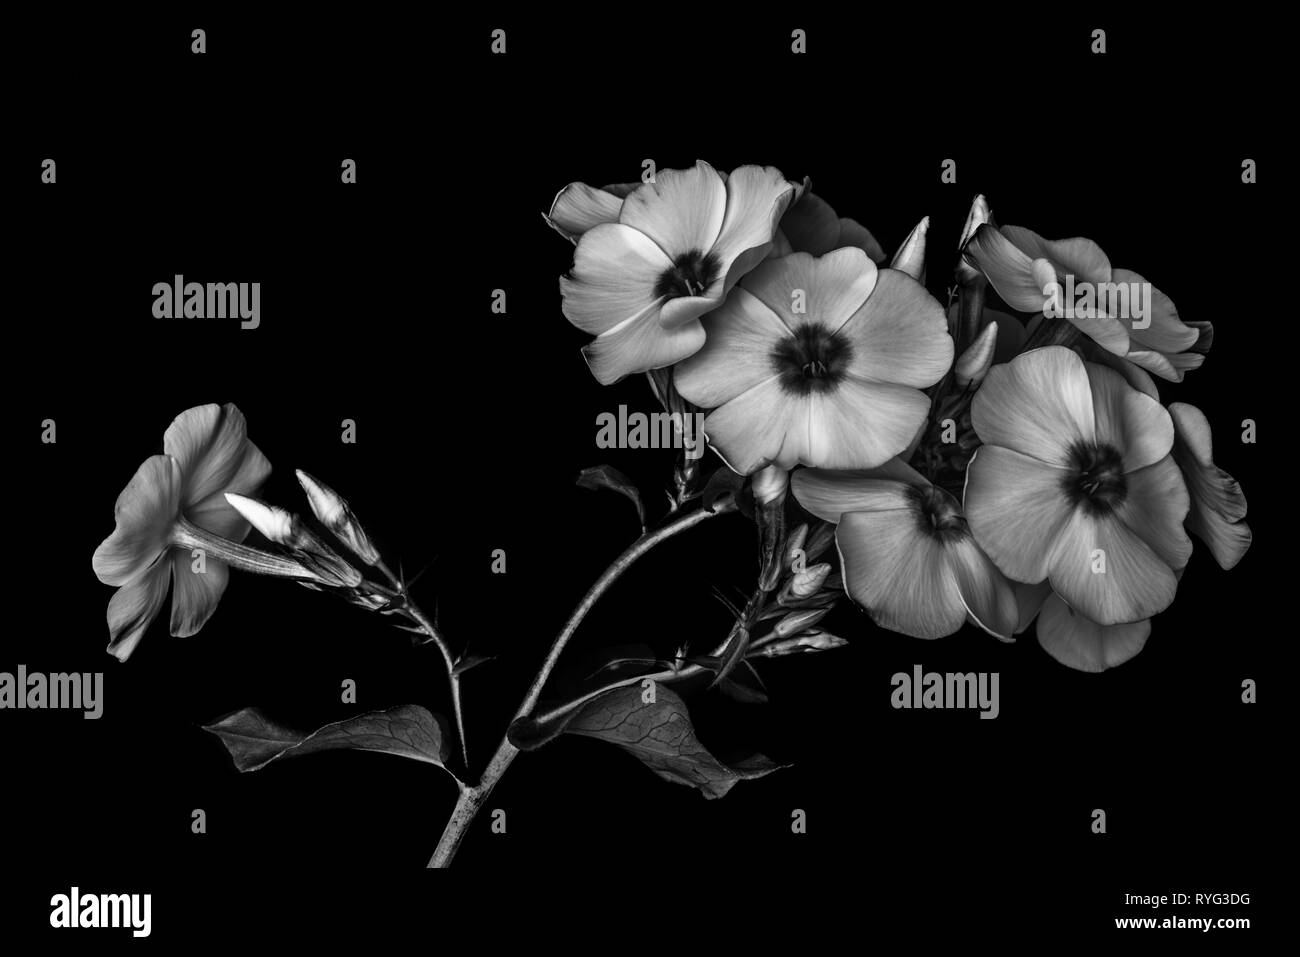 Fine art still life detailed floral monochrome macro photography of a single isolated stem of phlox blossoms,buds,black background, vintage painting Stock Photo